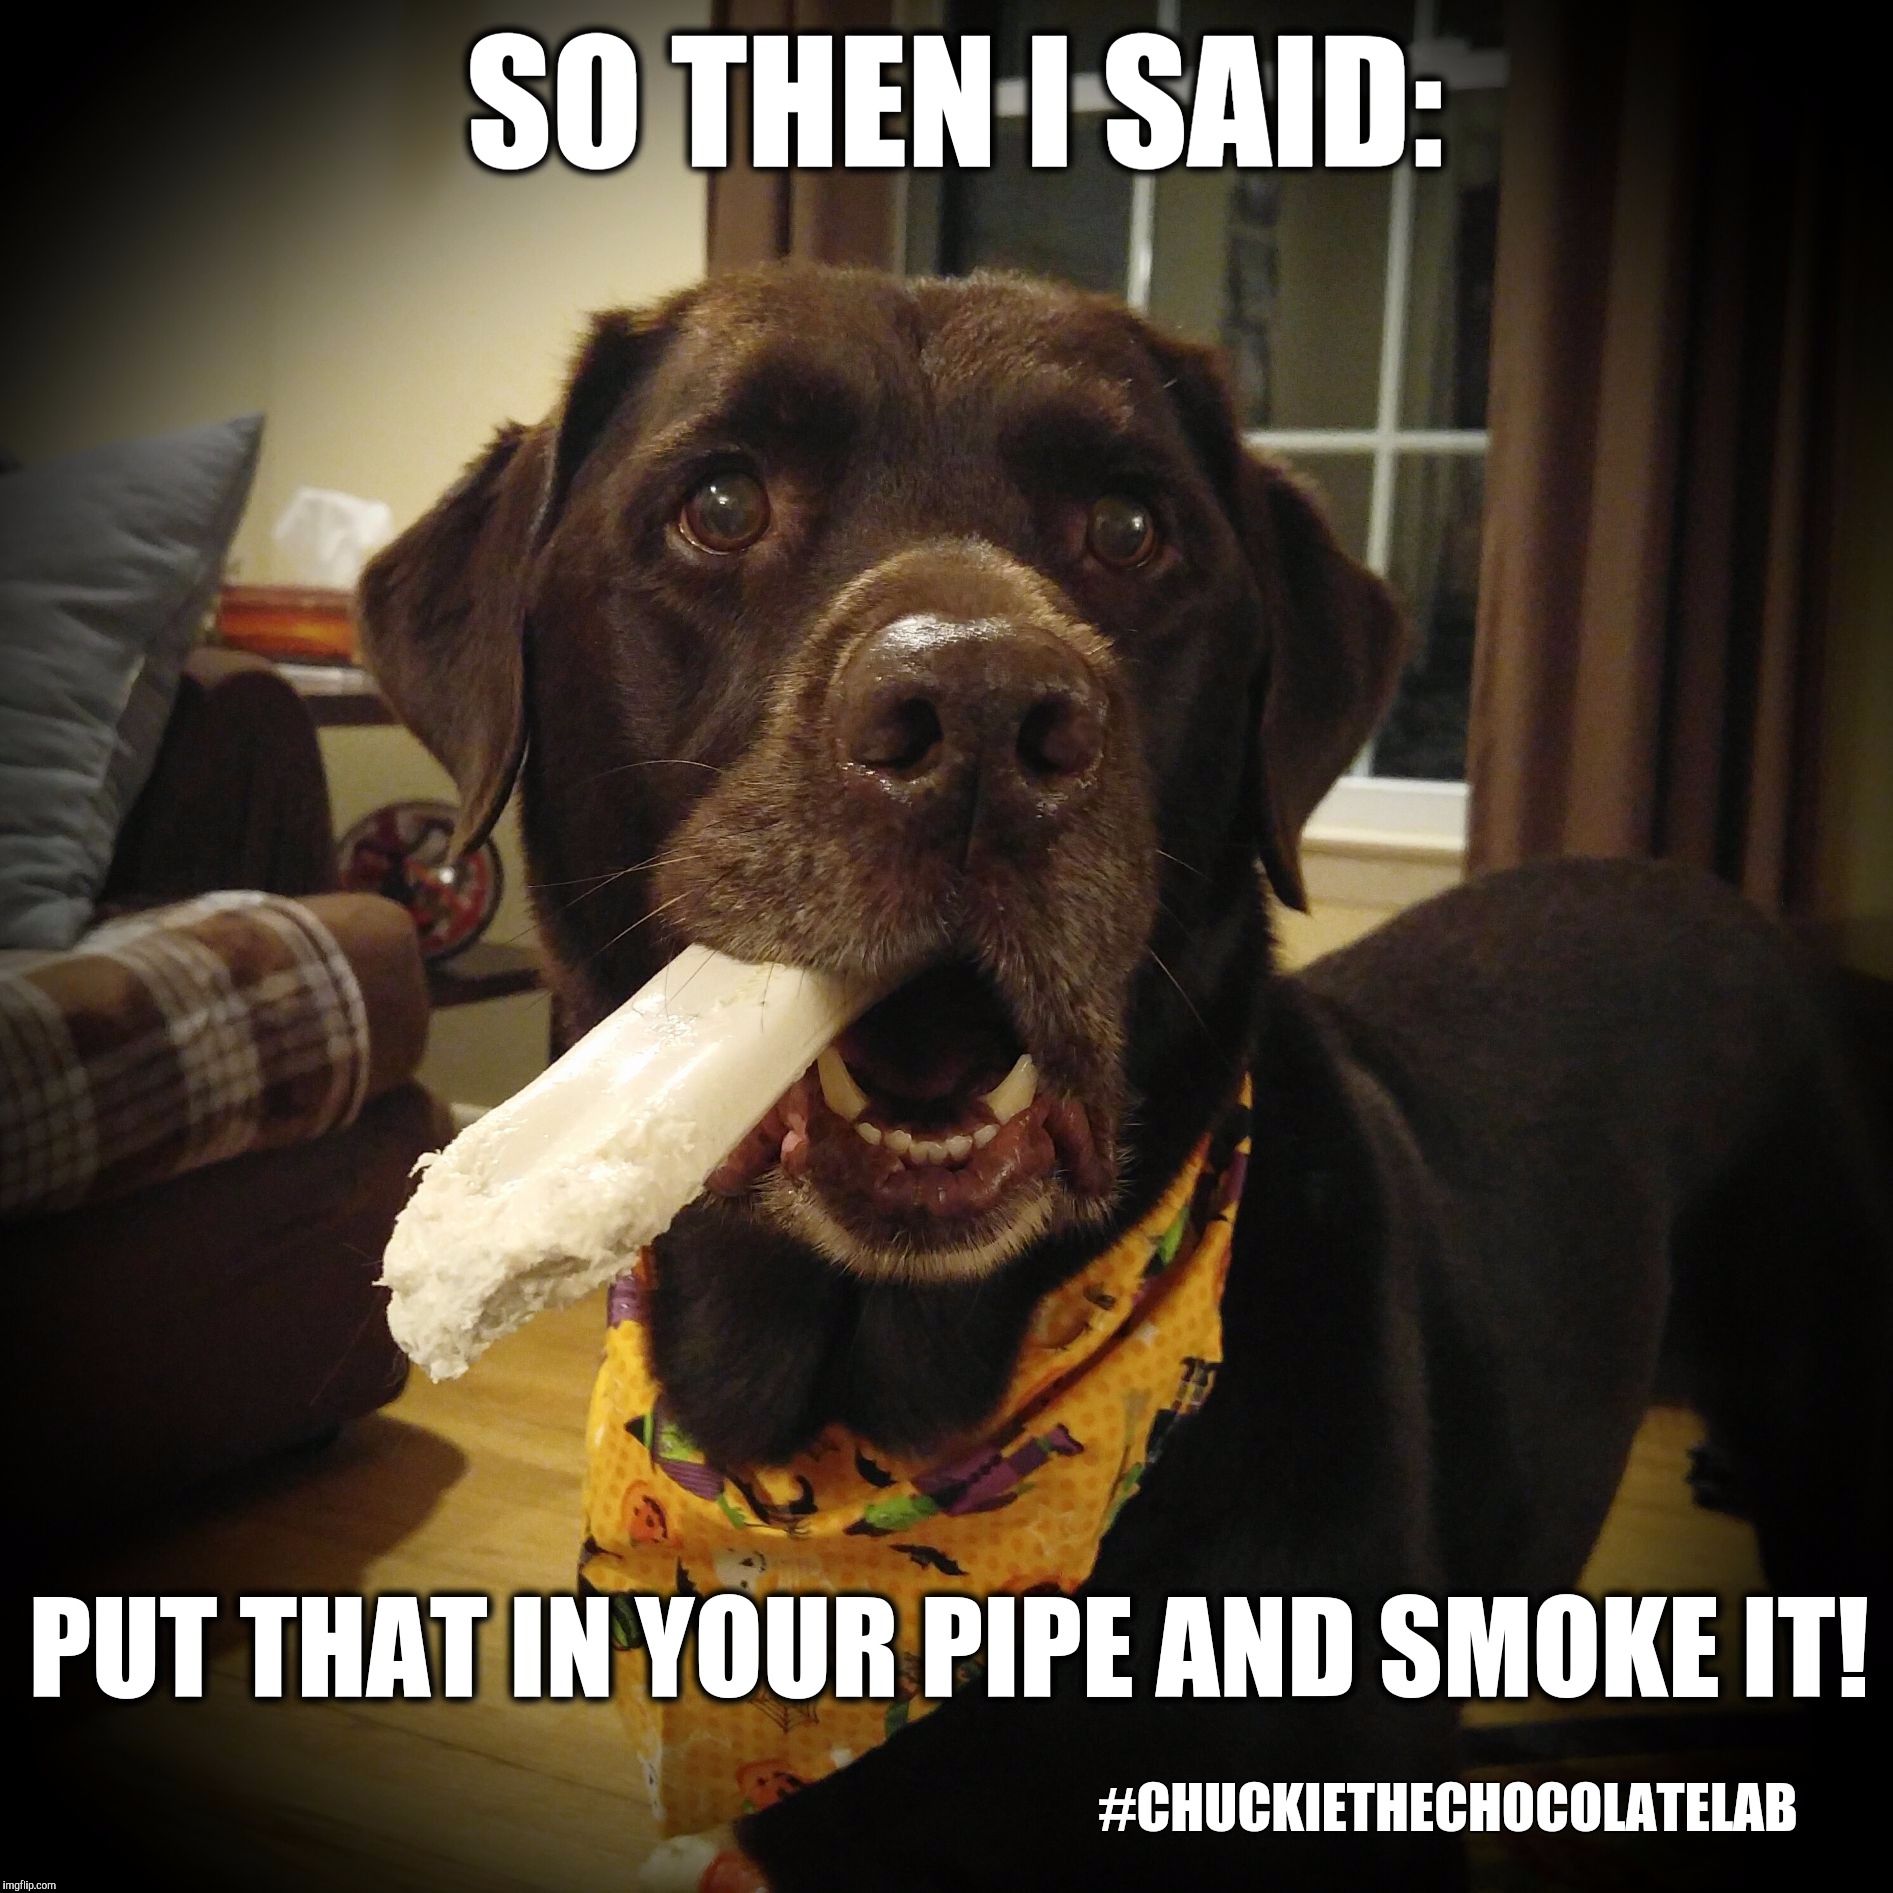 So then I said "Put that in your pipe and smoke it"  | SO THEN I SAID:; PUT THAT IN YOUR PIPE AND SMOKE IT! #CHUCKIETHECHOCOLATELAB | image tagged in chuckie the chocolate lab,put that in your pipe,funny,memes,dogs,labrador | made w/ Imgflip meme maker